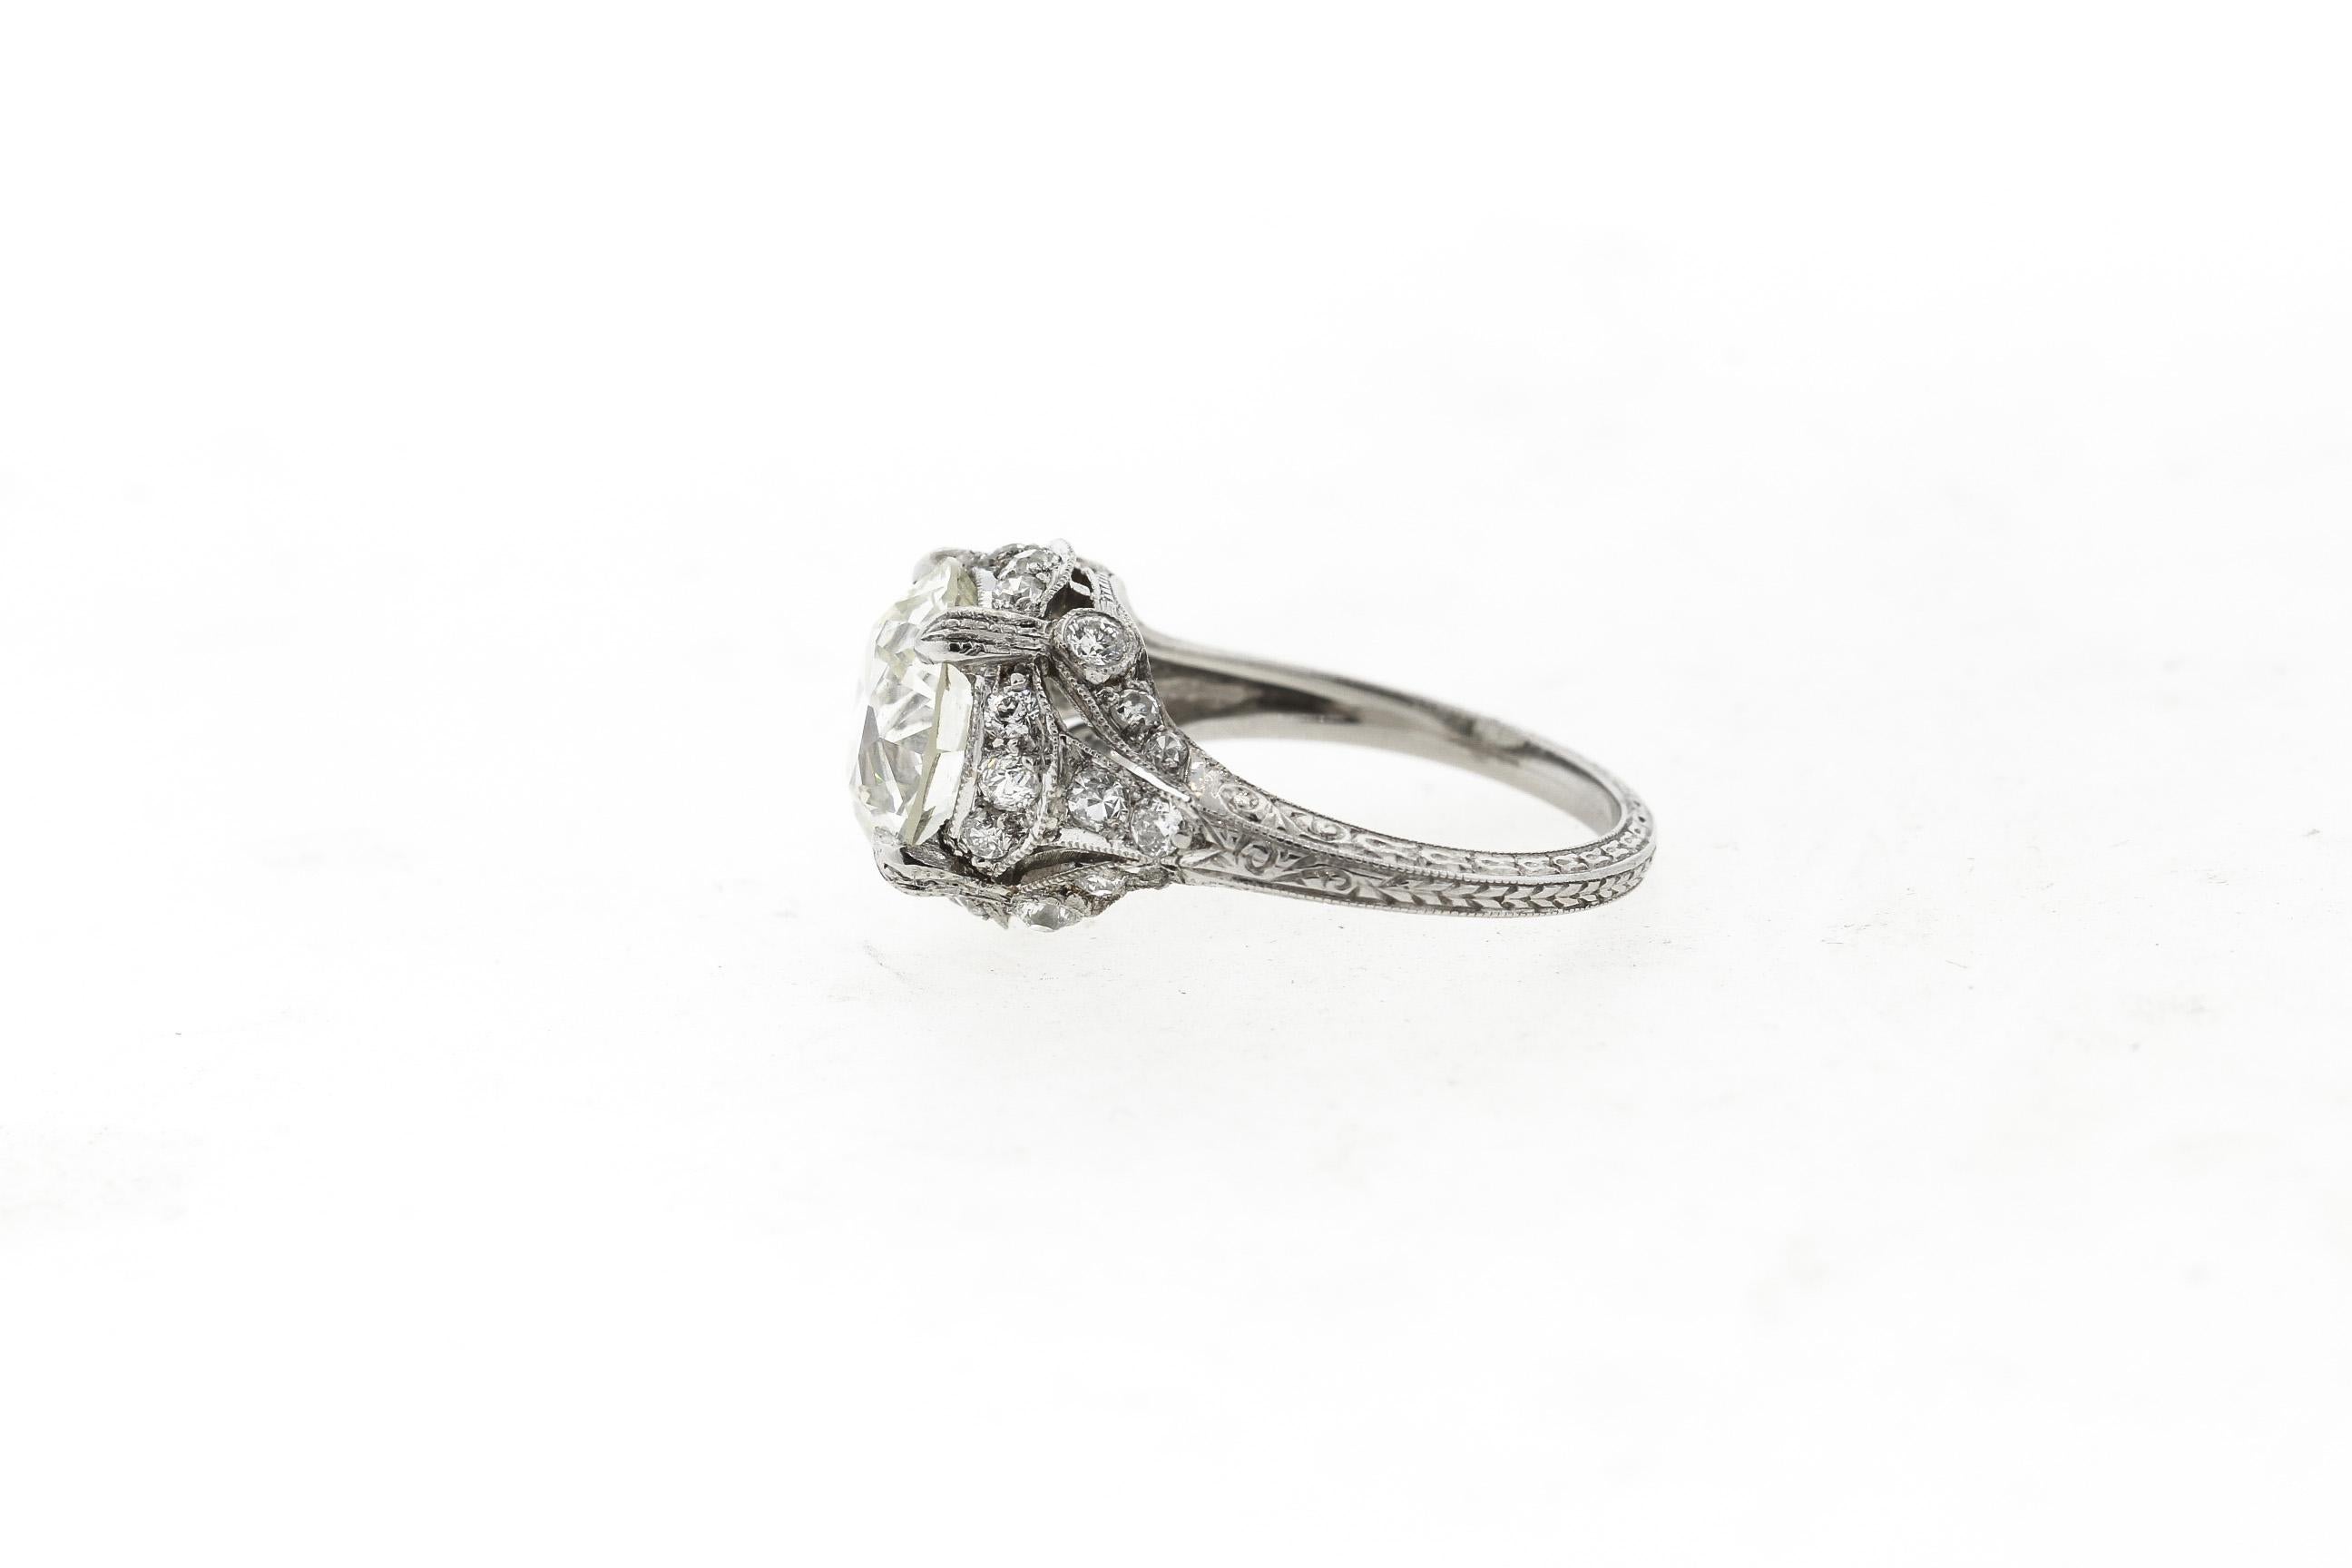 A lovely antique Art Deco platinum solitaire ring centering on an Old European cut diamond weighing 3.35 carats. The diamond has been certified by the Gemological Institute of America and graded as an L color with VS1 clarity. There are additional